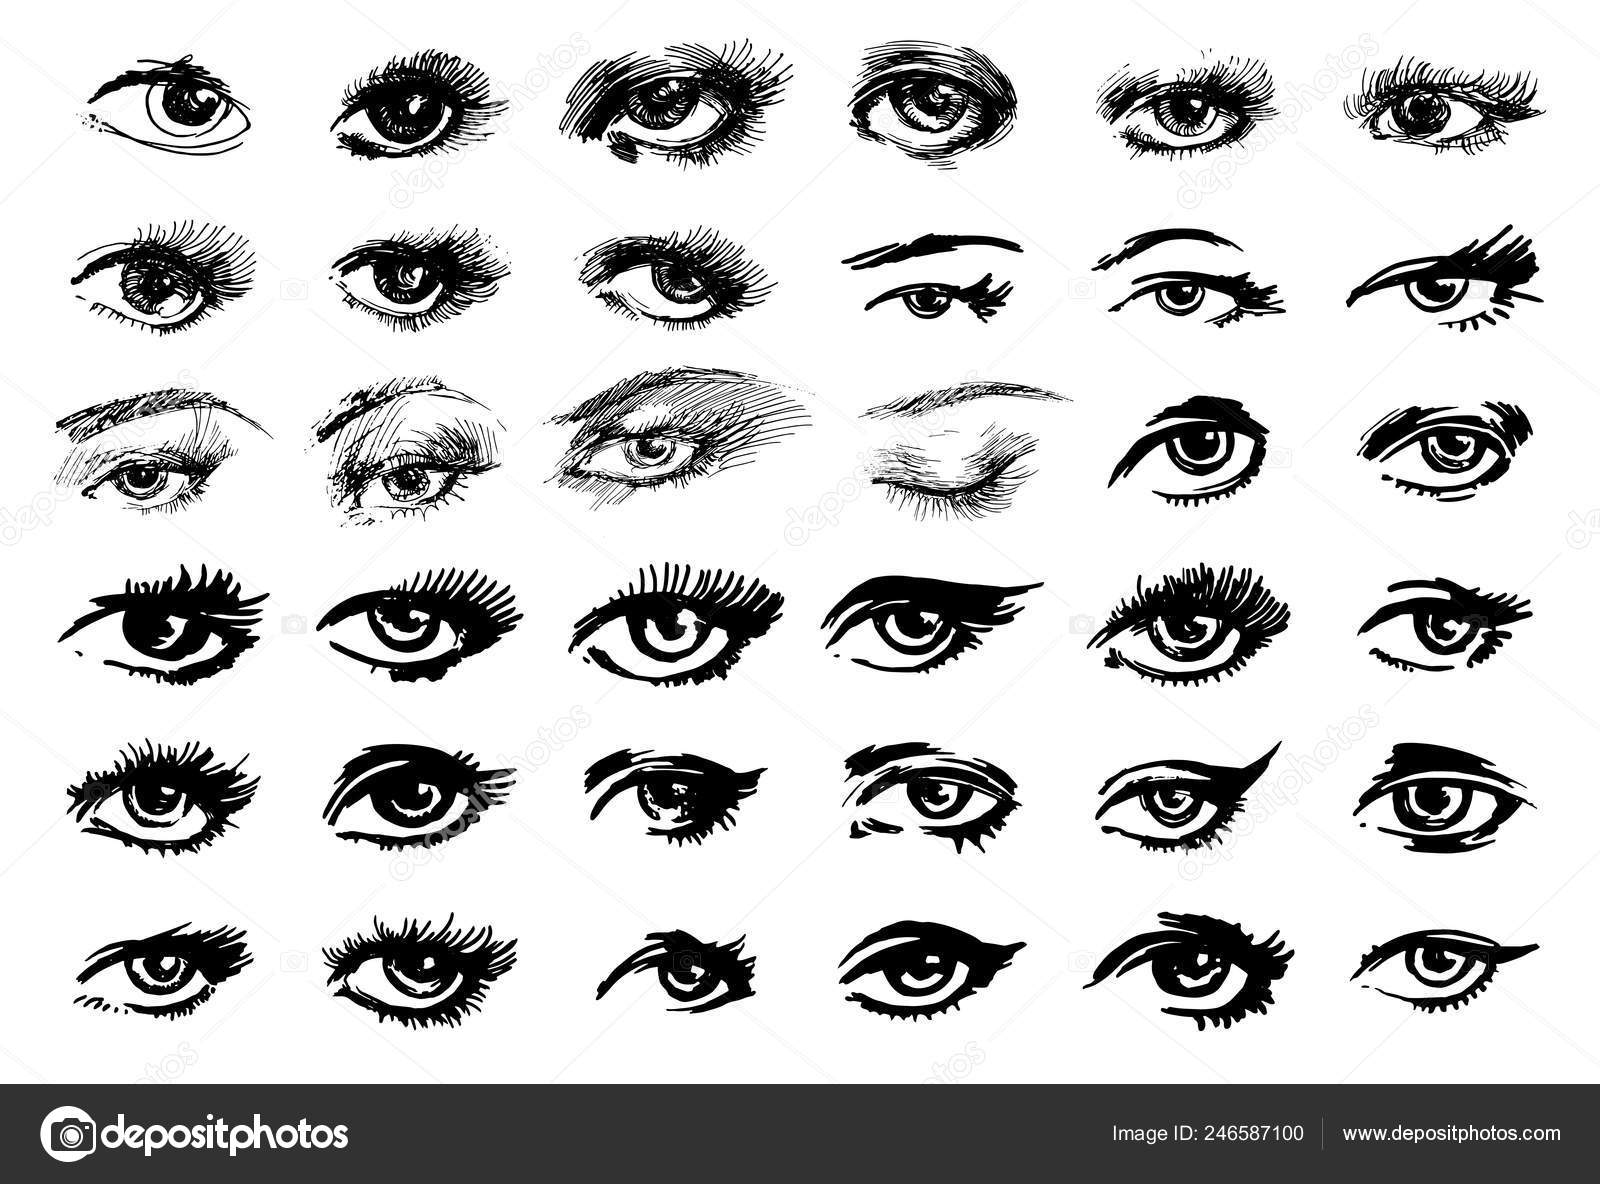 68,505 Female Eyes Sketch Images, Stock Photos & Vectors | Shutterstock